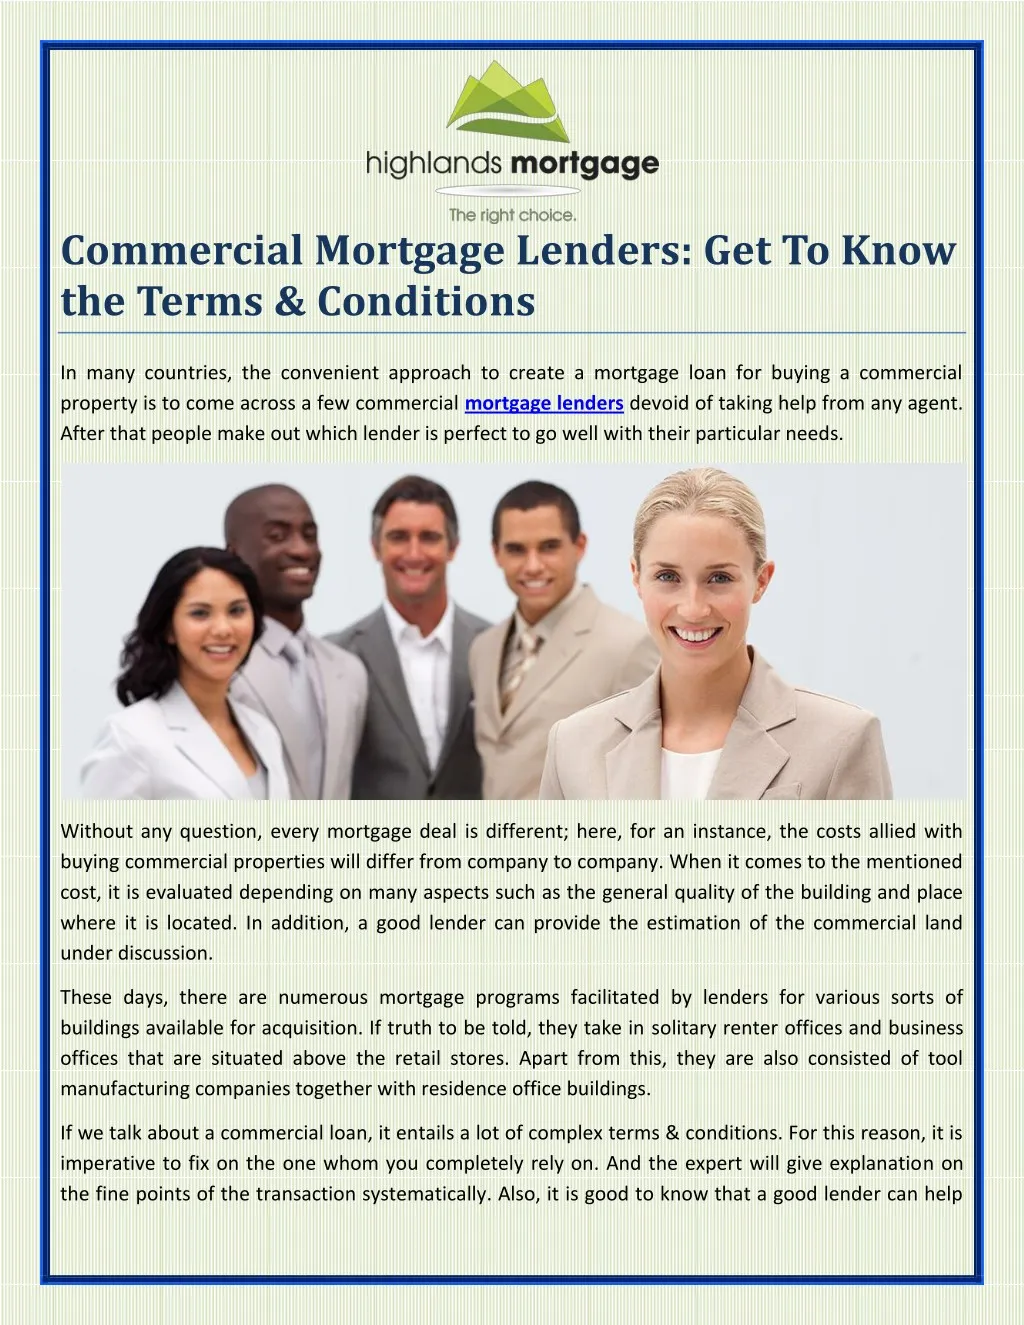 commercial mortgage lenders get to know the terms